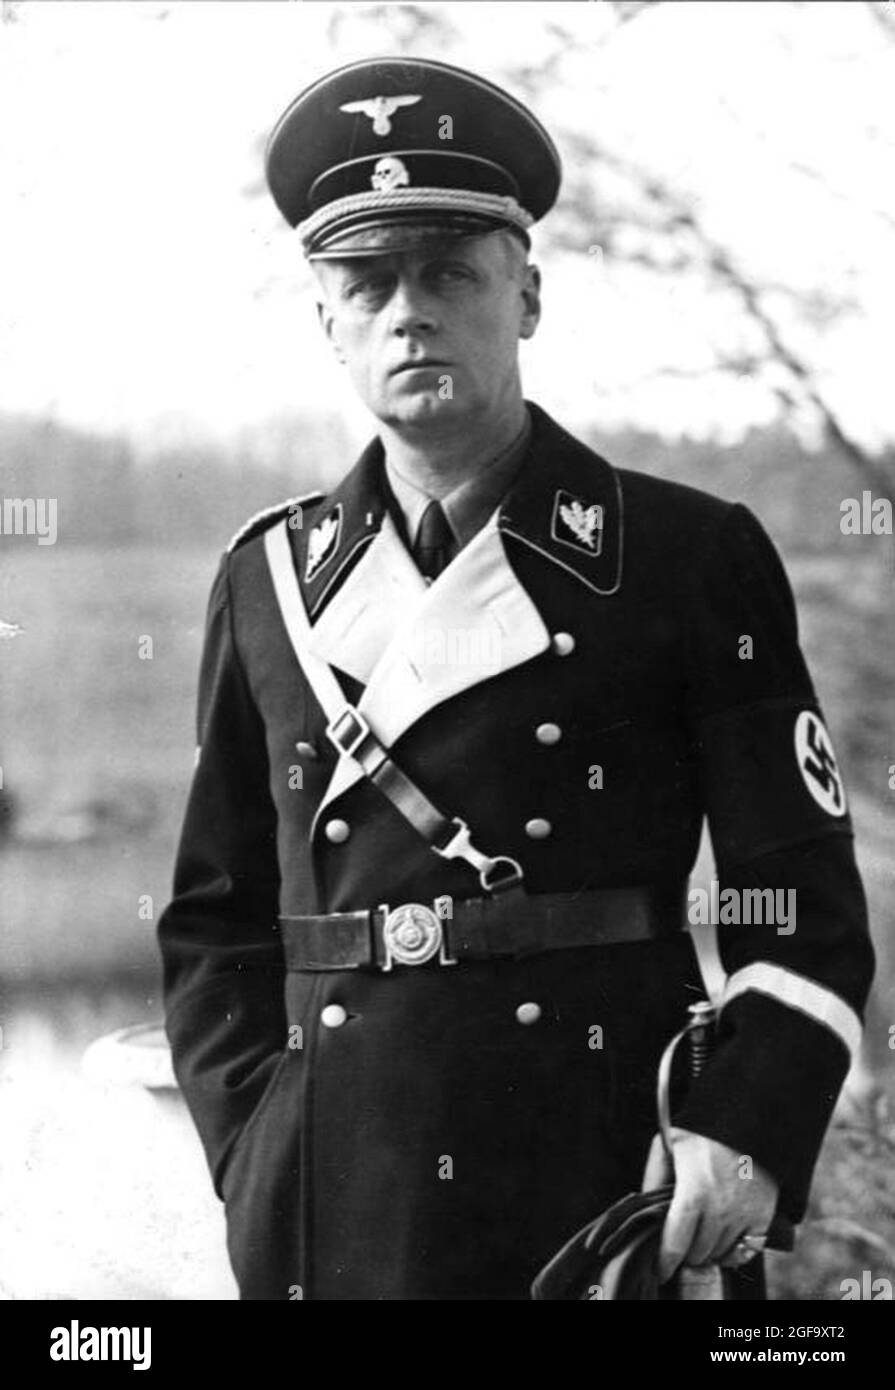 The Nazi leader and politician Joachim von Ribbentrop. He was the nazi Minister for Foreign Affairs (Foreign Secretary). He was captured in 1945, tried and hanged at Nuremberg in 1946. Credit: German Bundesarchiv Stock Photo